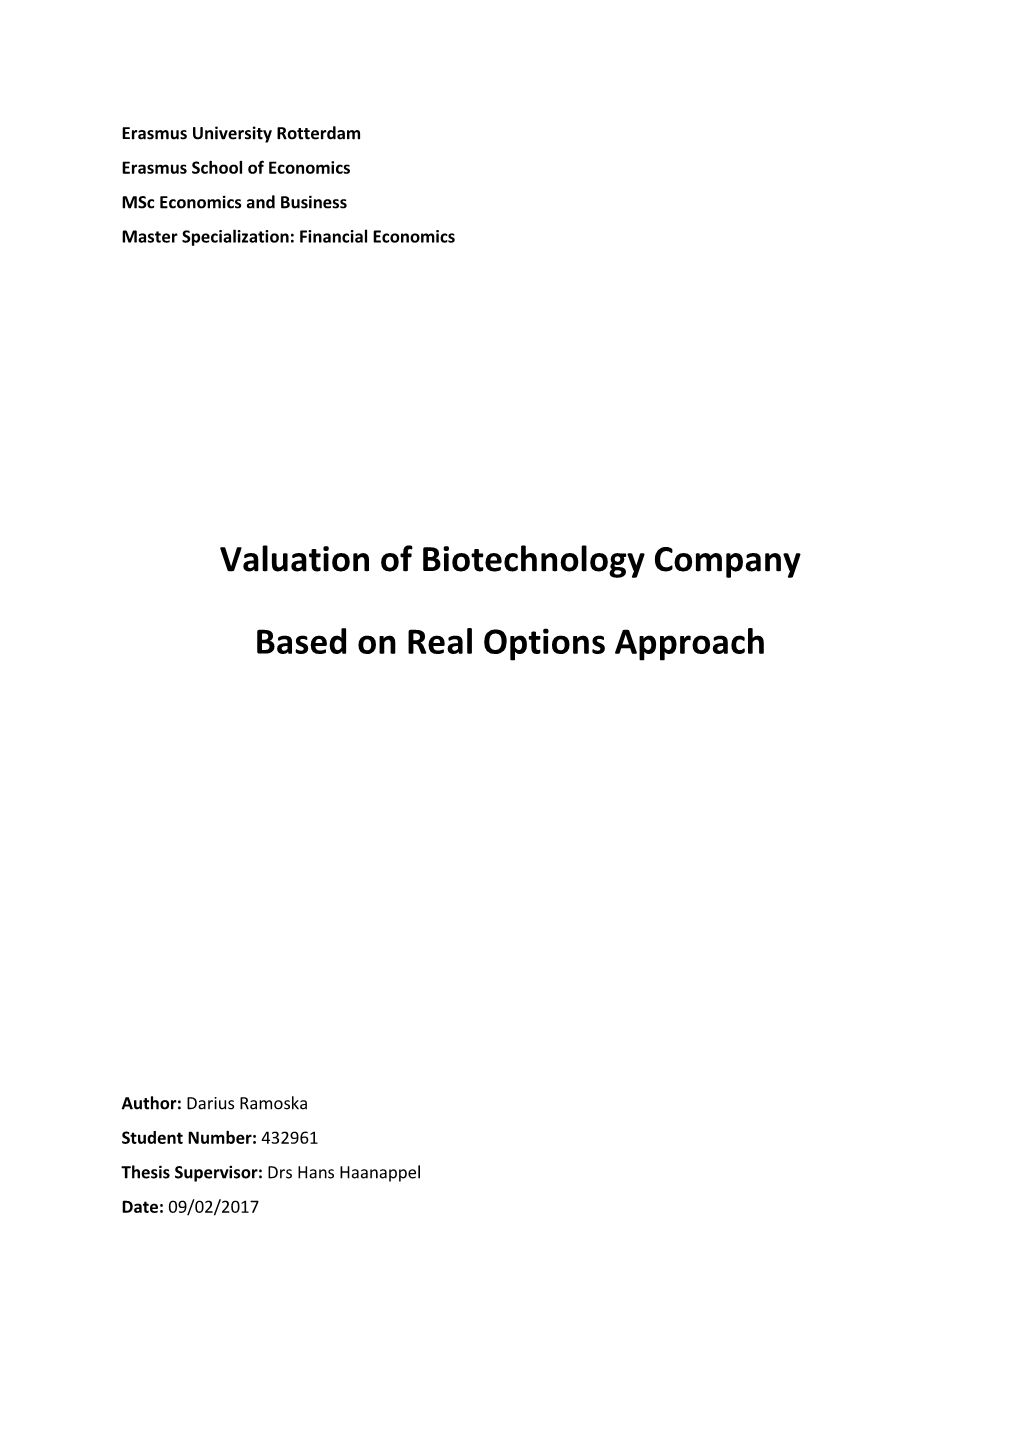 Valuation of Biotechnology Company Based on Real Options Approach